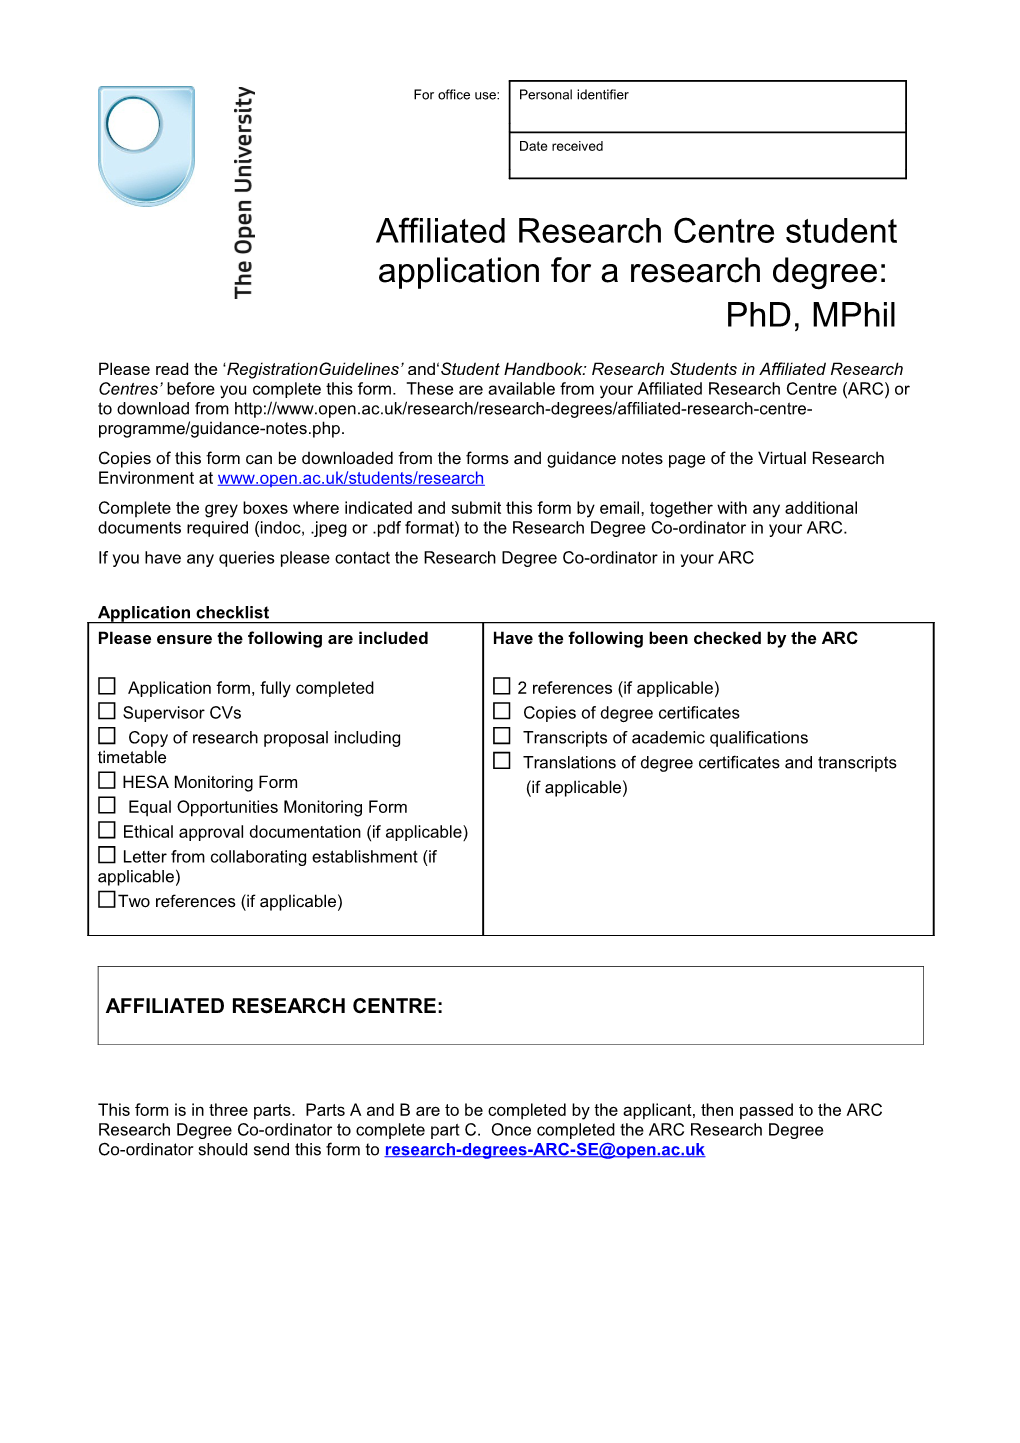 Please Read the Registrationguidelines and Student Handbook: Research Students in Affiliated